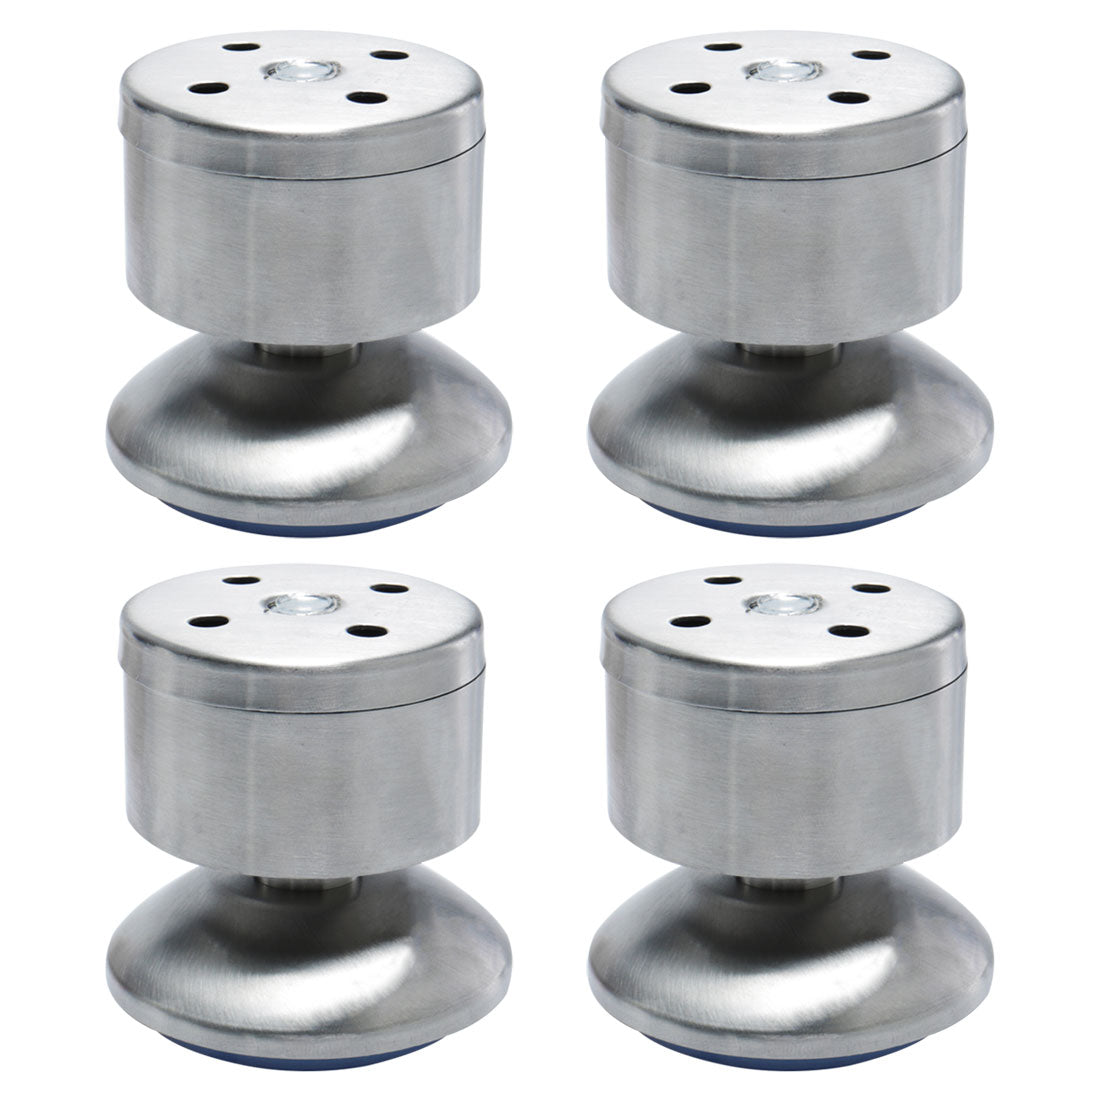 uxcell Uxcell Furniture Leg Stainless Steel Table Height Replacement Adjustable Feet 4pcs